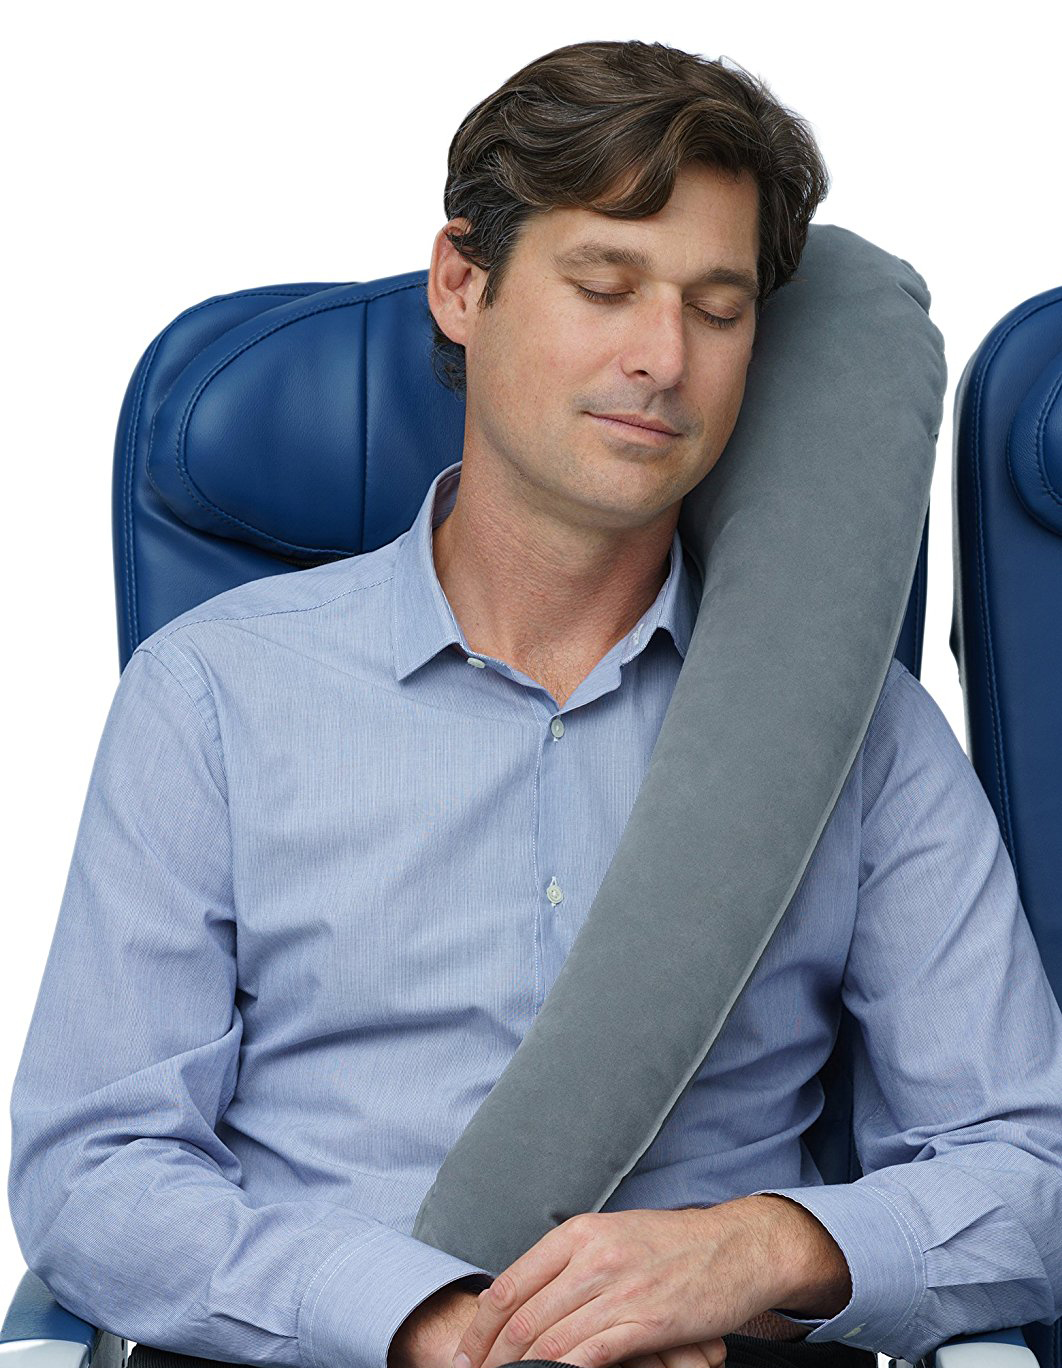 Travelrest Ultimate Best Travel Pillow & Neck Pillow - Straps to Airplane Seat & Car - image 2 of 7